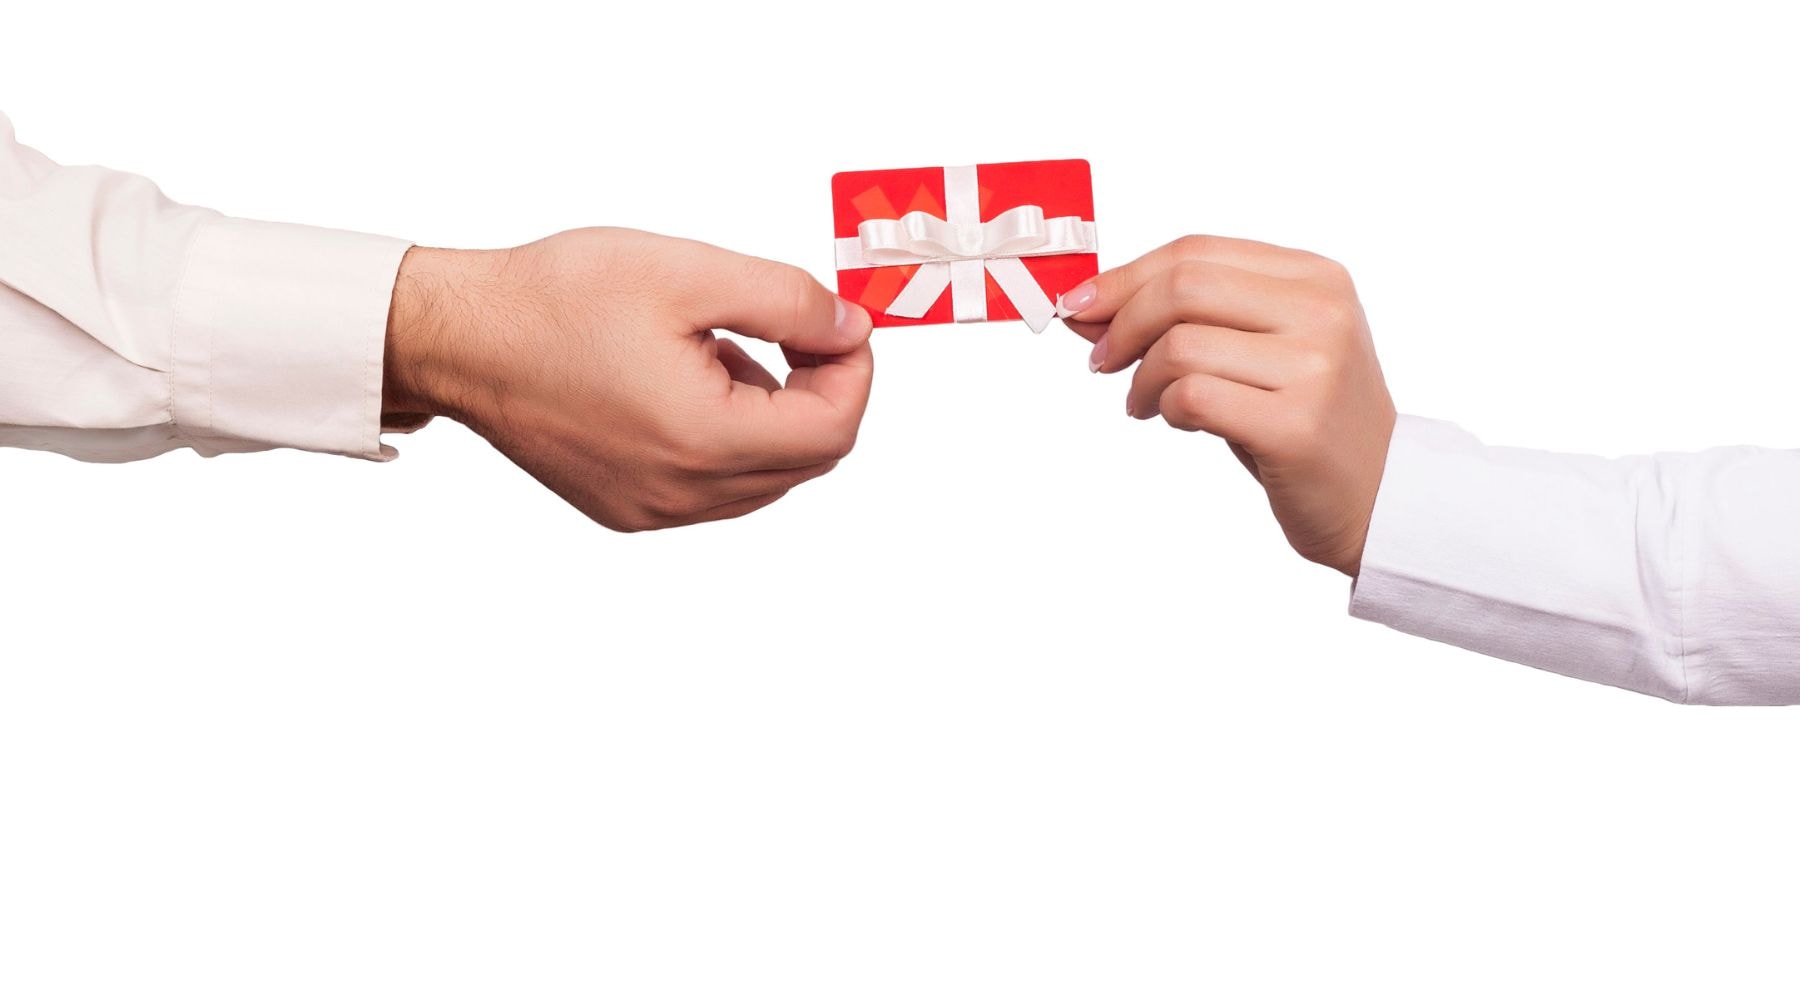 Two hands exchanging a gift card with a red festive bow.